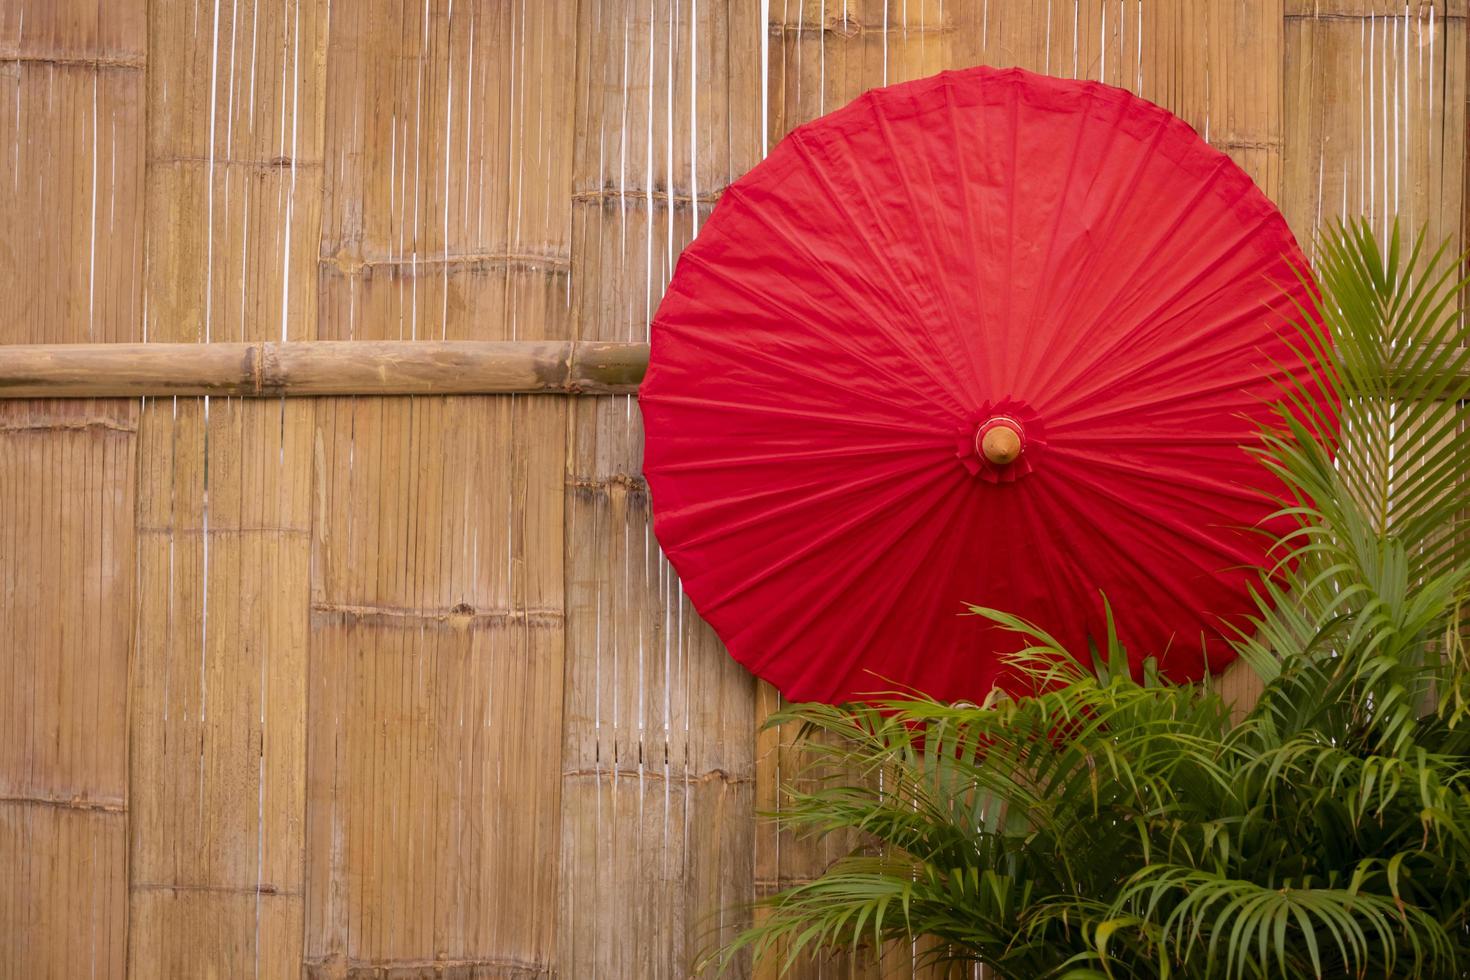 Red paper umbrella with green palm leaves on bamboo wooden wall background,  wall decoration design concept photo